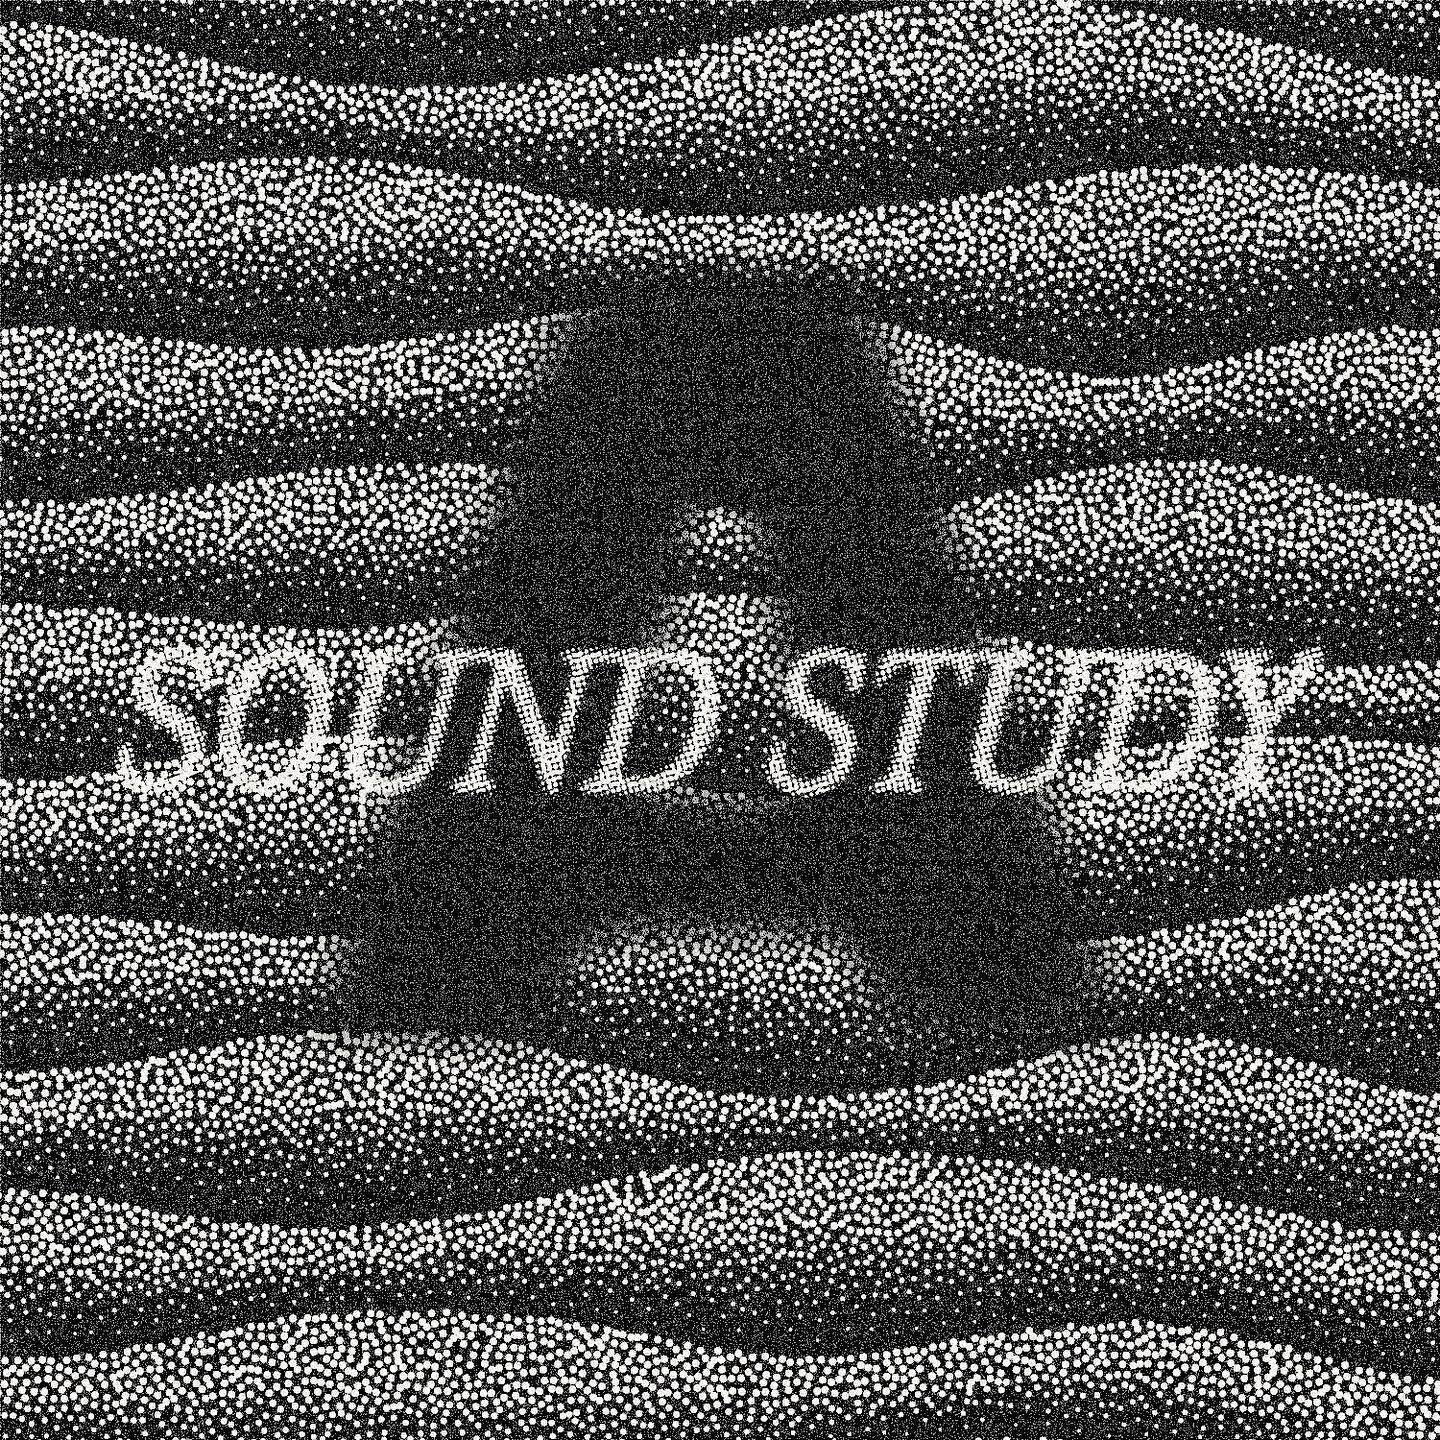 New art work for @sashamvrie new &ldquo;sound study&rdquo;. A lesson in discovery. Love this.